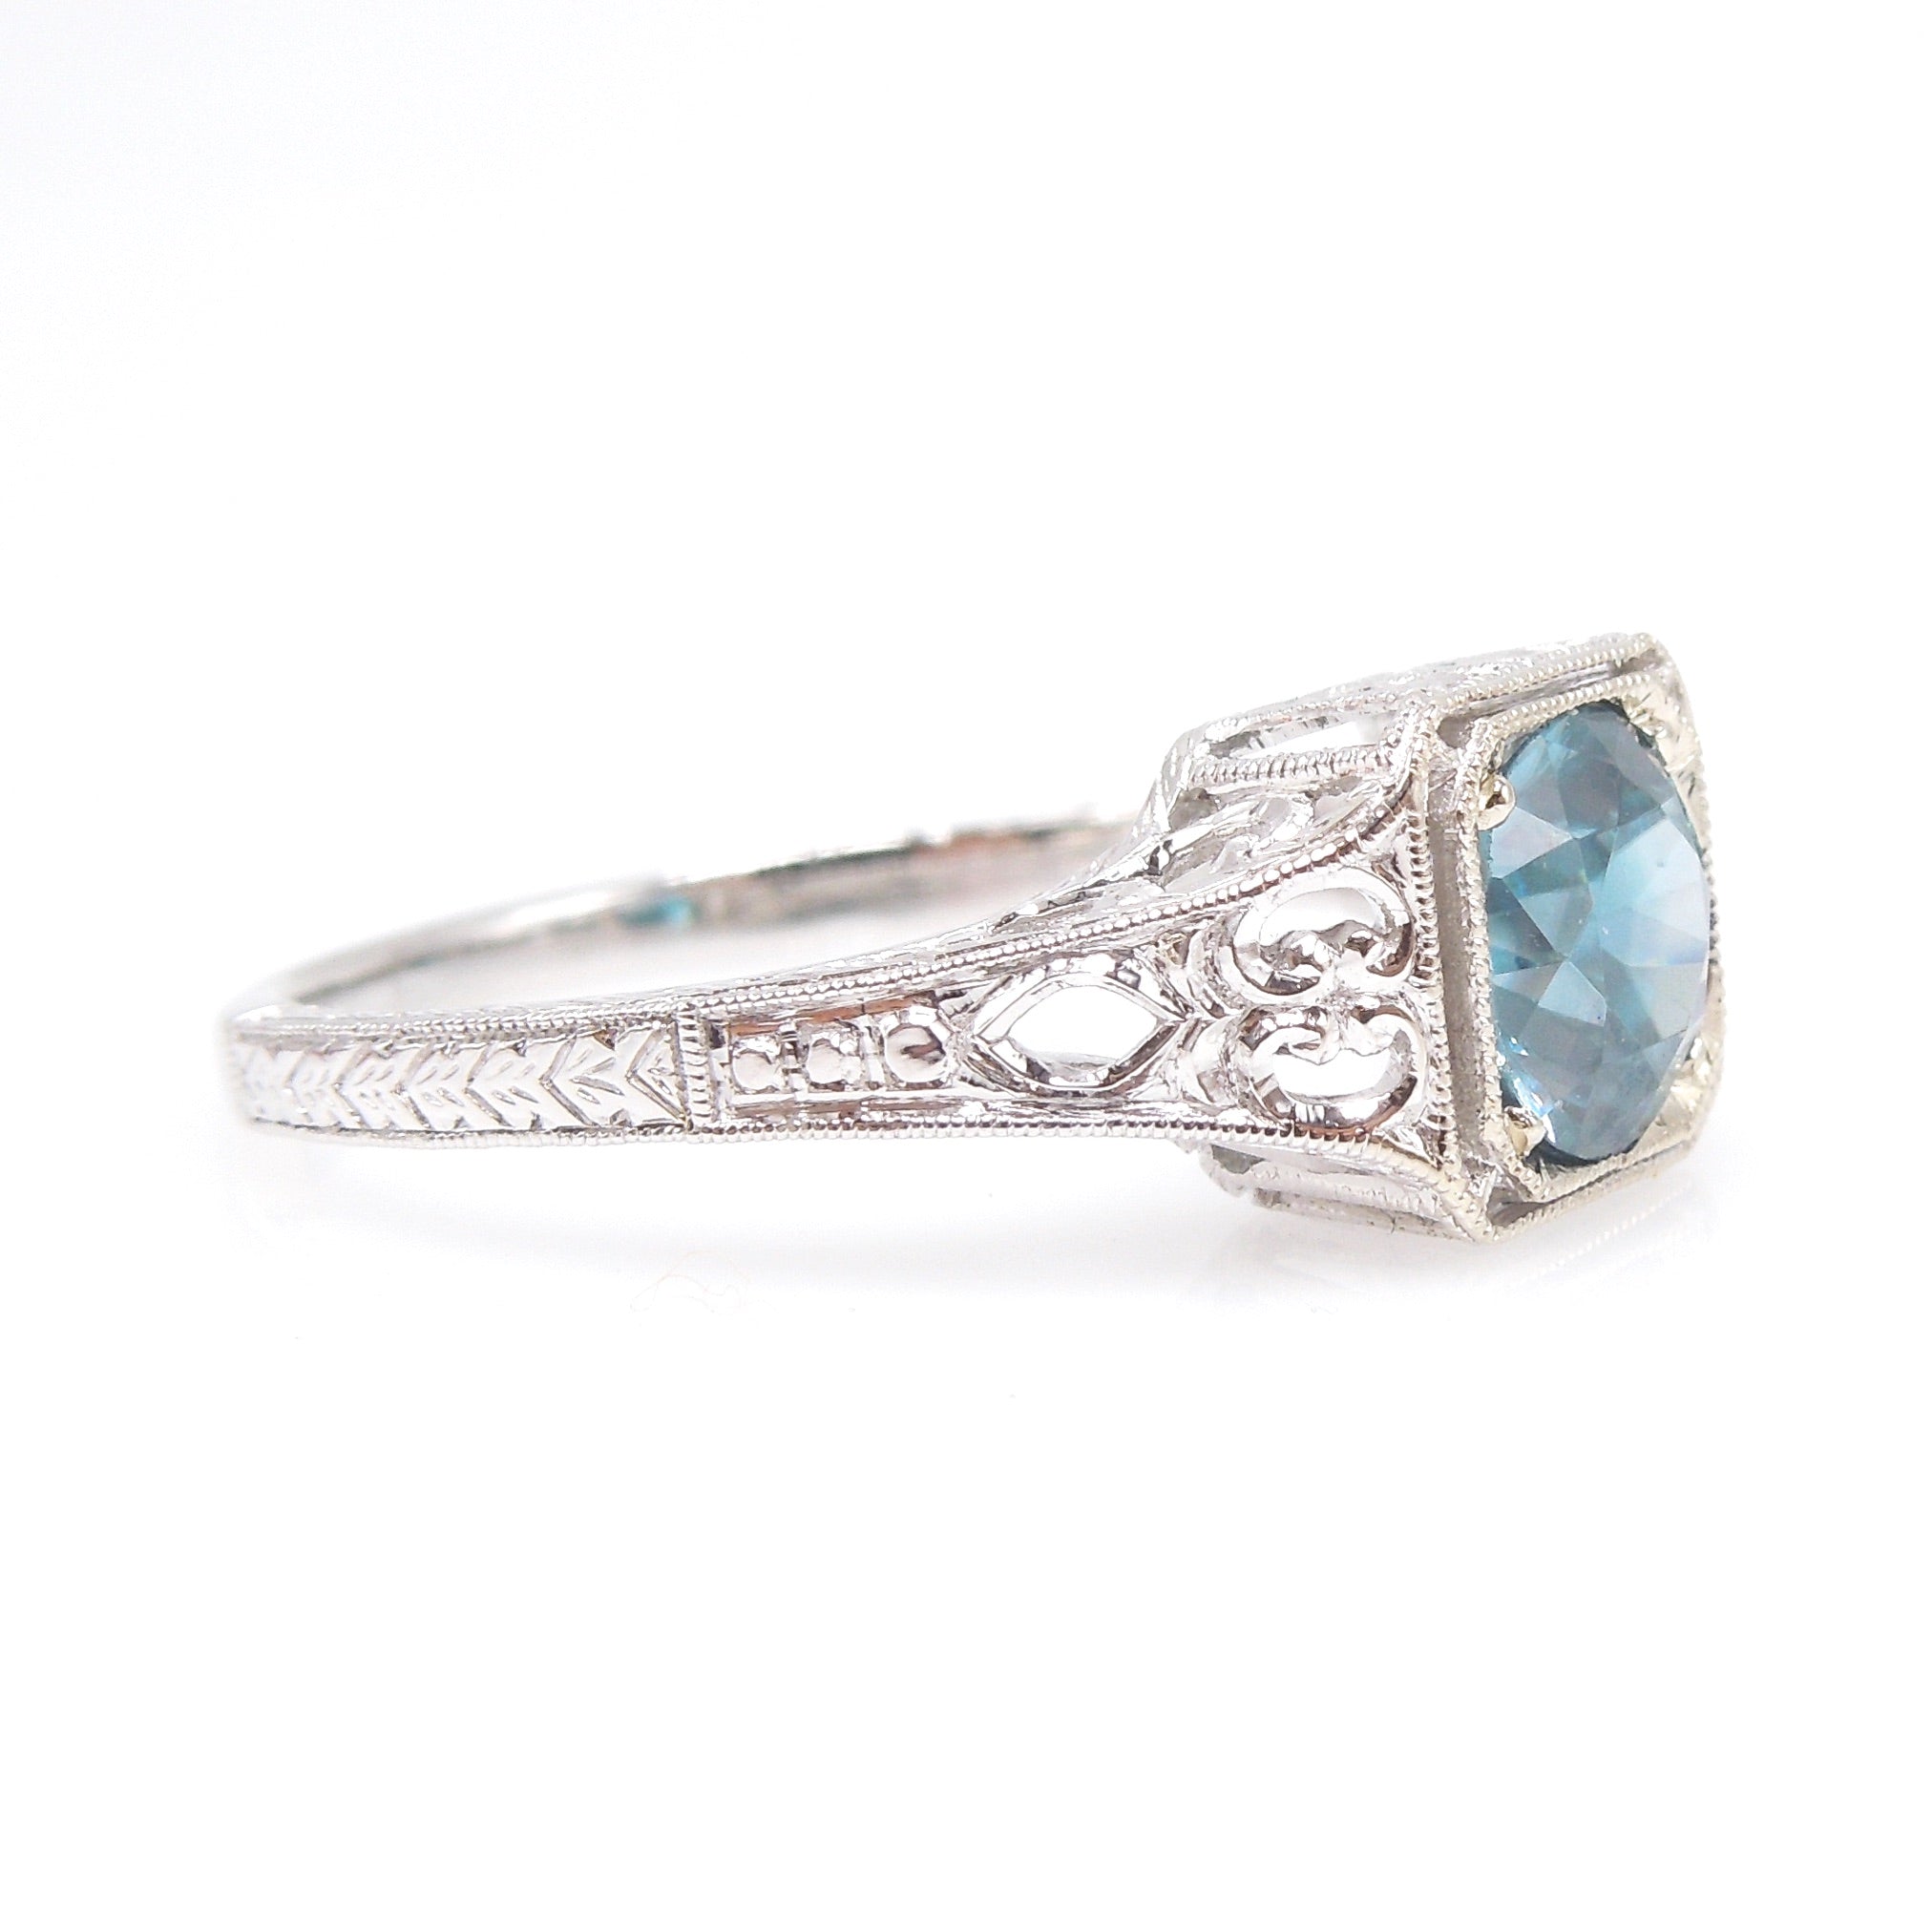 Filigreed Art Deco Style Ring in White Gold with 1.66ct Blue Zircon